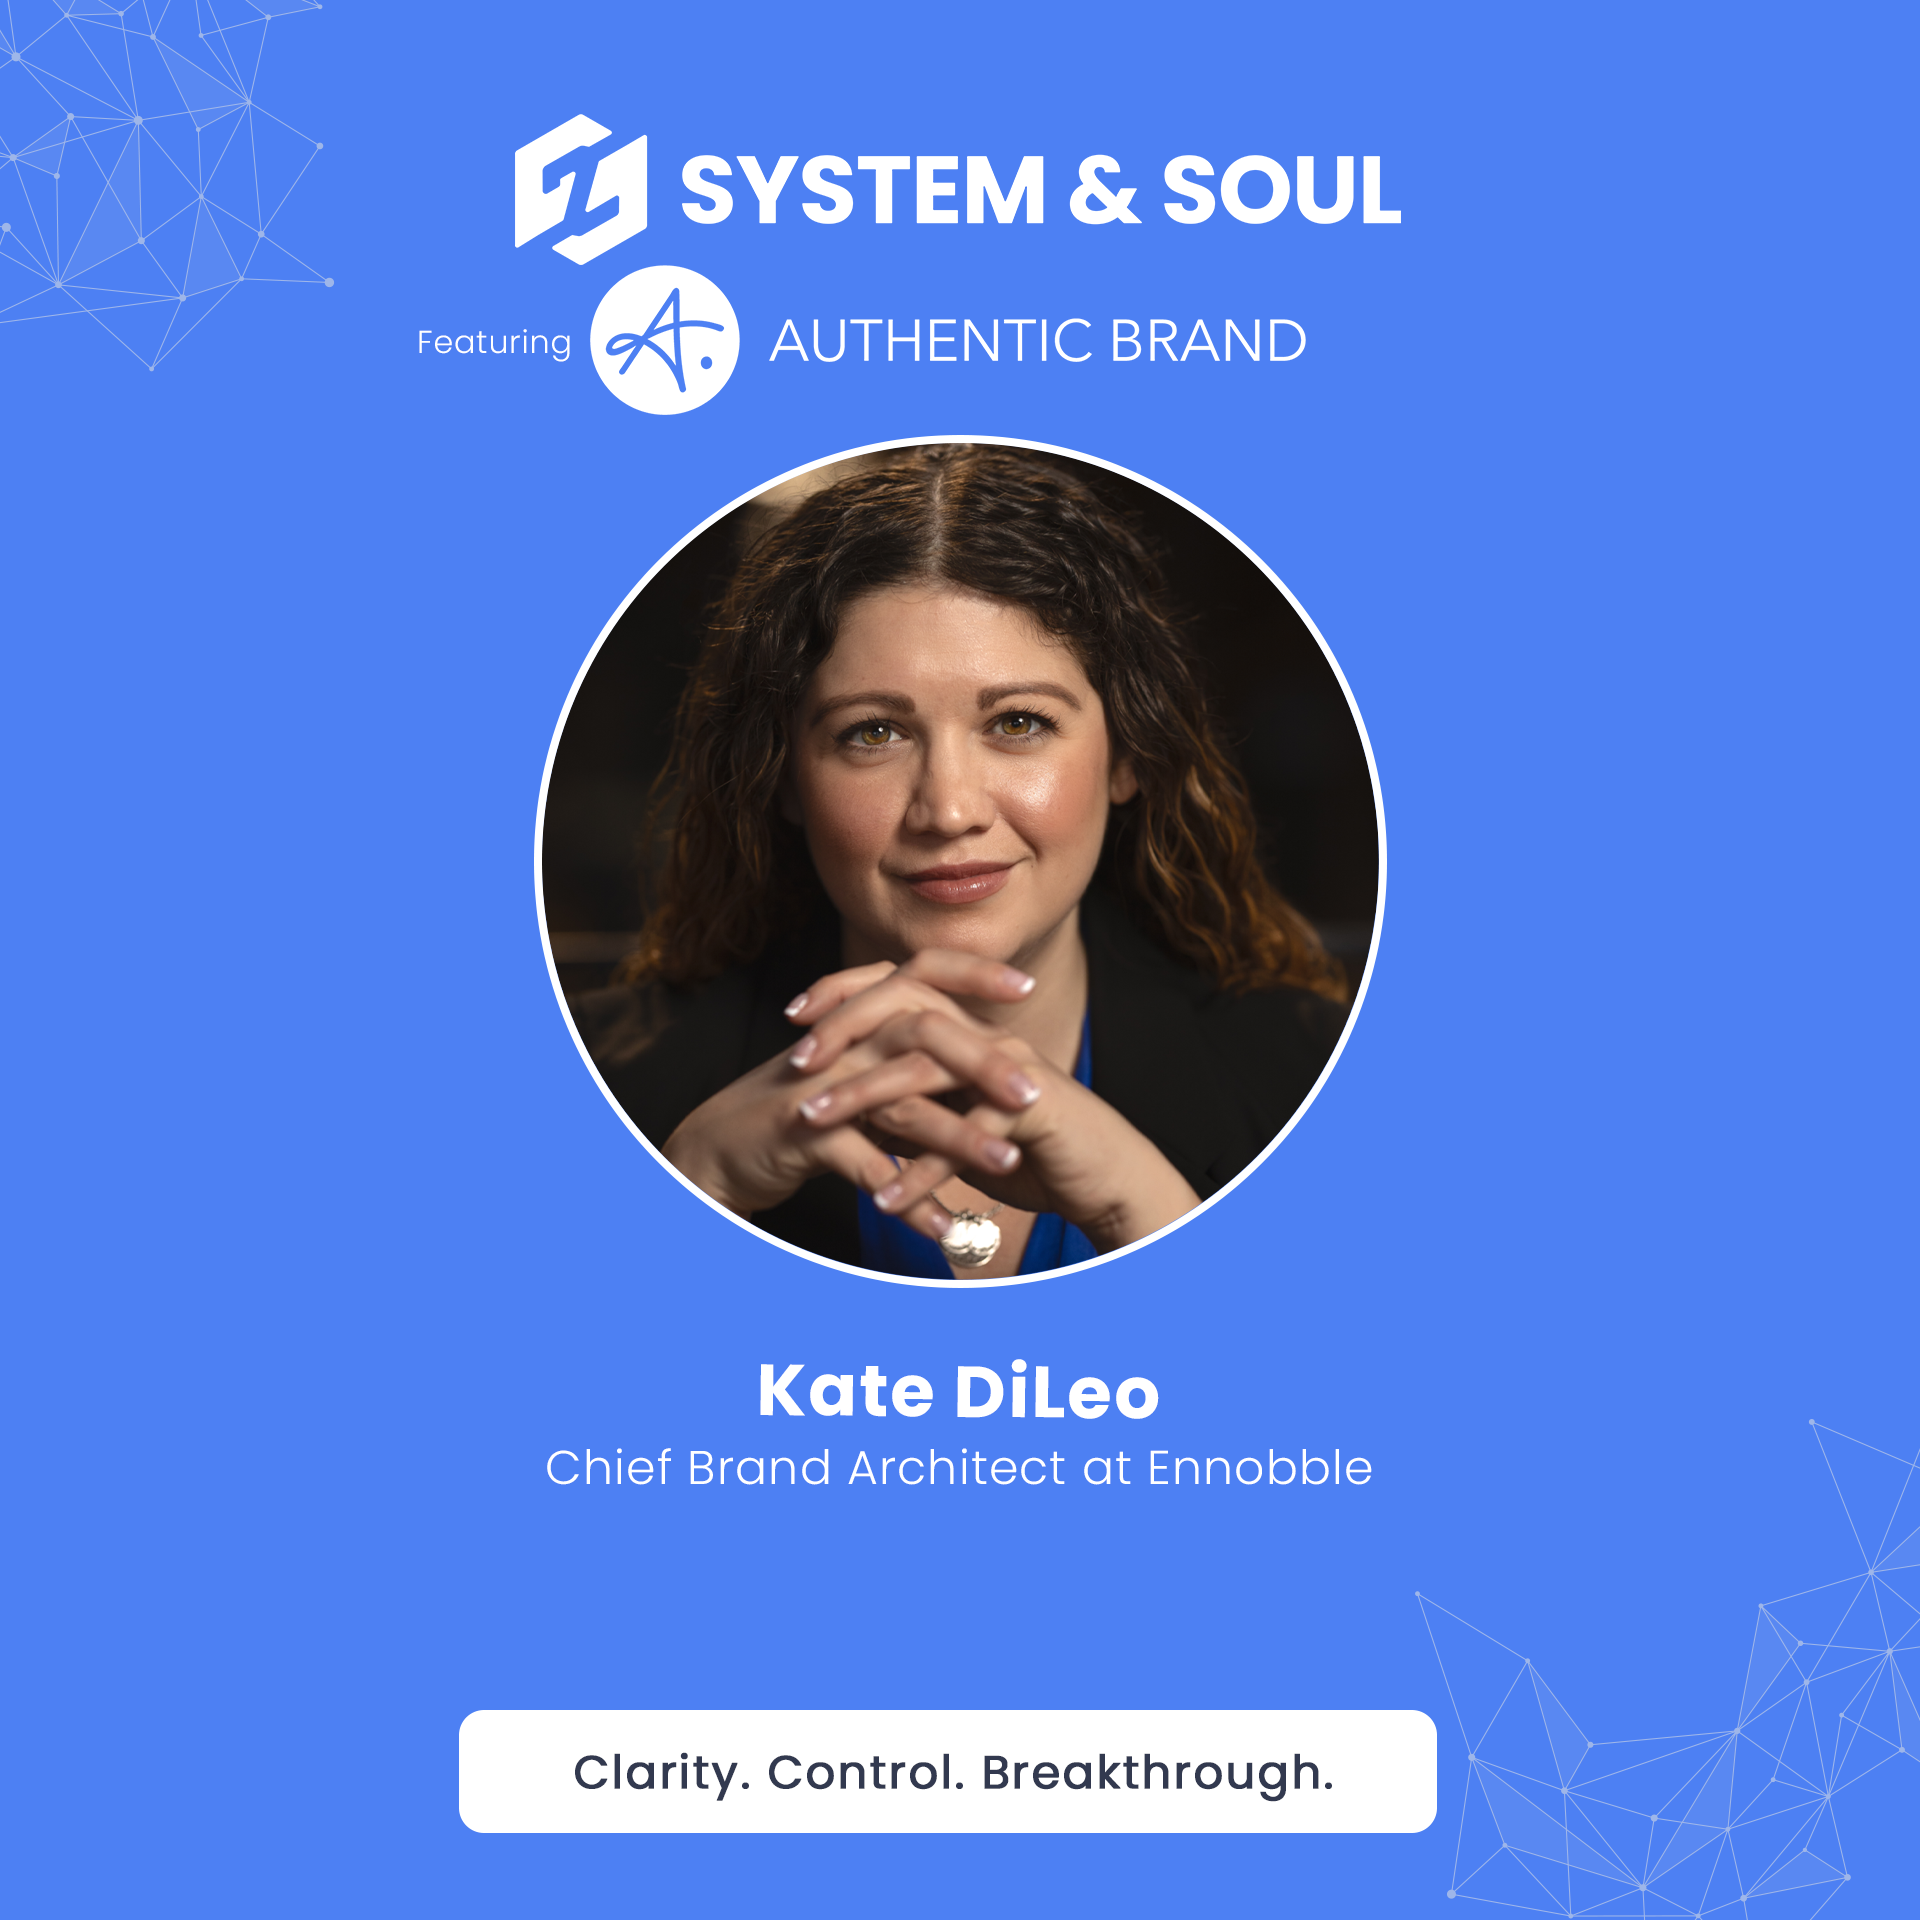 036-Soul-Based-Marketing-with-Kate-DiLeo-FINAL